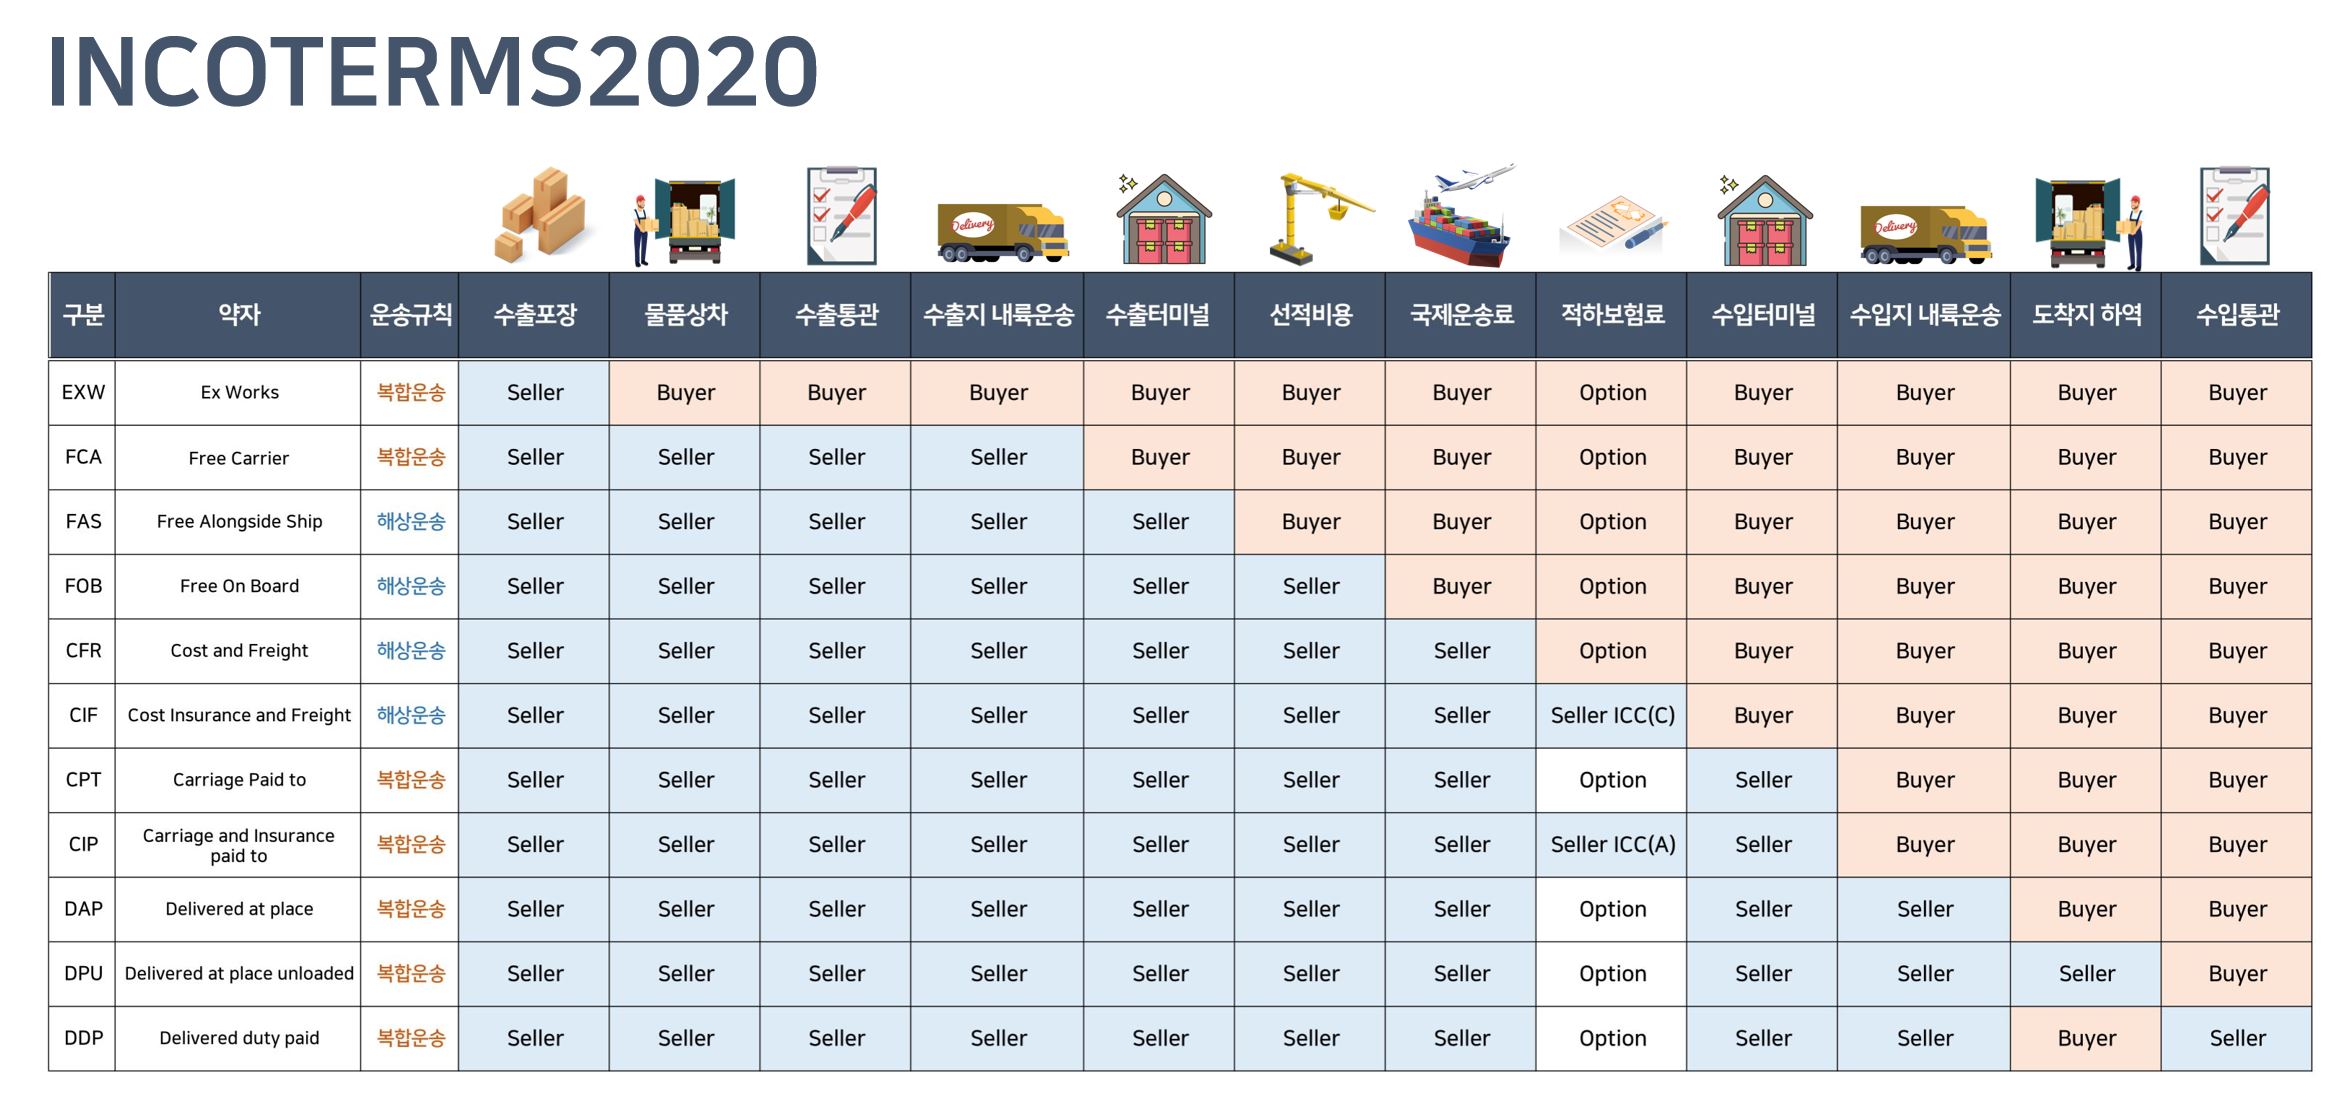 Incoterms 2020 Quick Reference Chart 0616